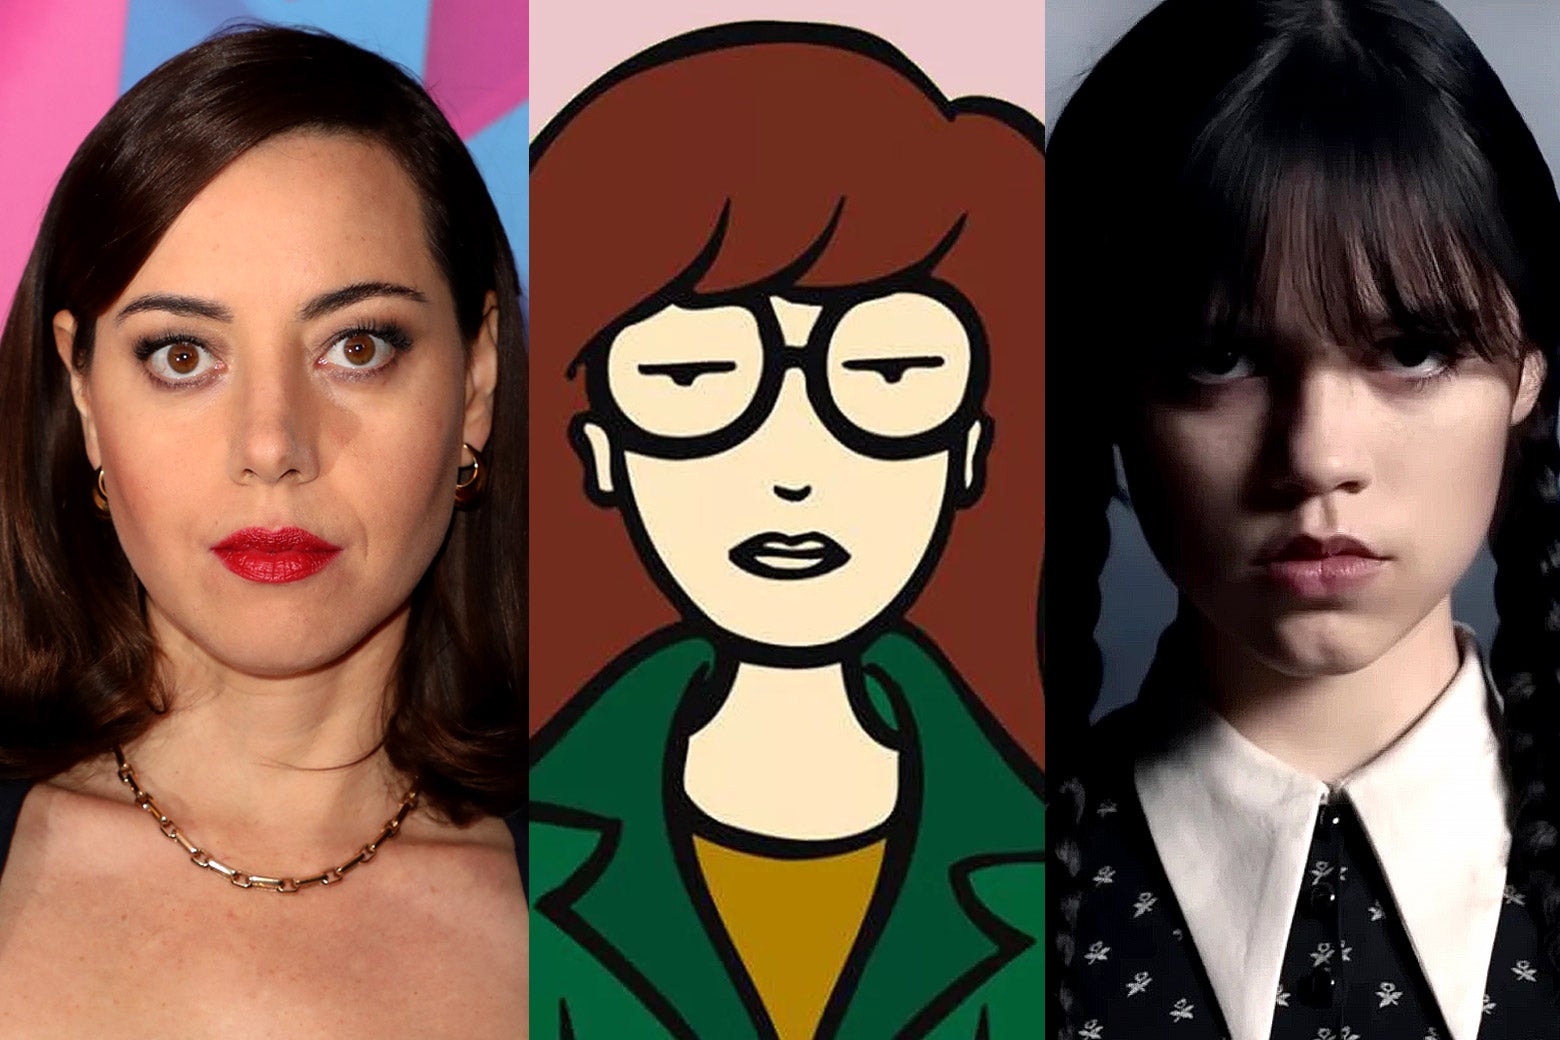 White Lotus Aubrey Plaza, Wednesday Addams, and our obsession with deadpan women pic